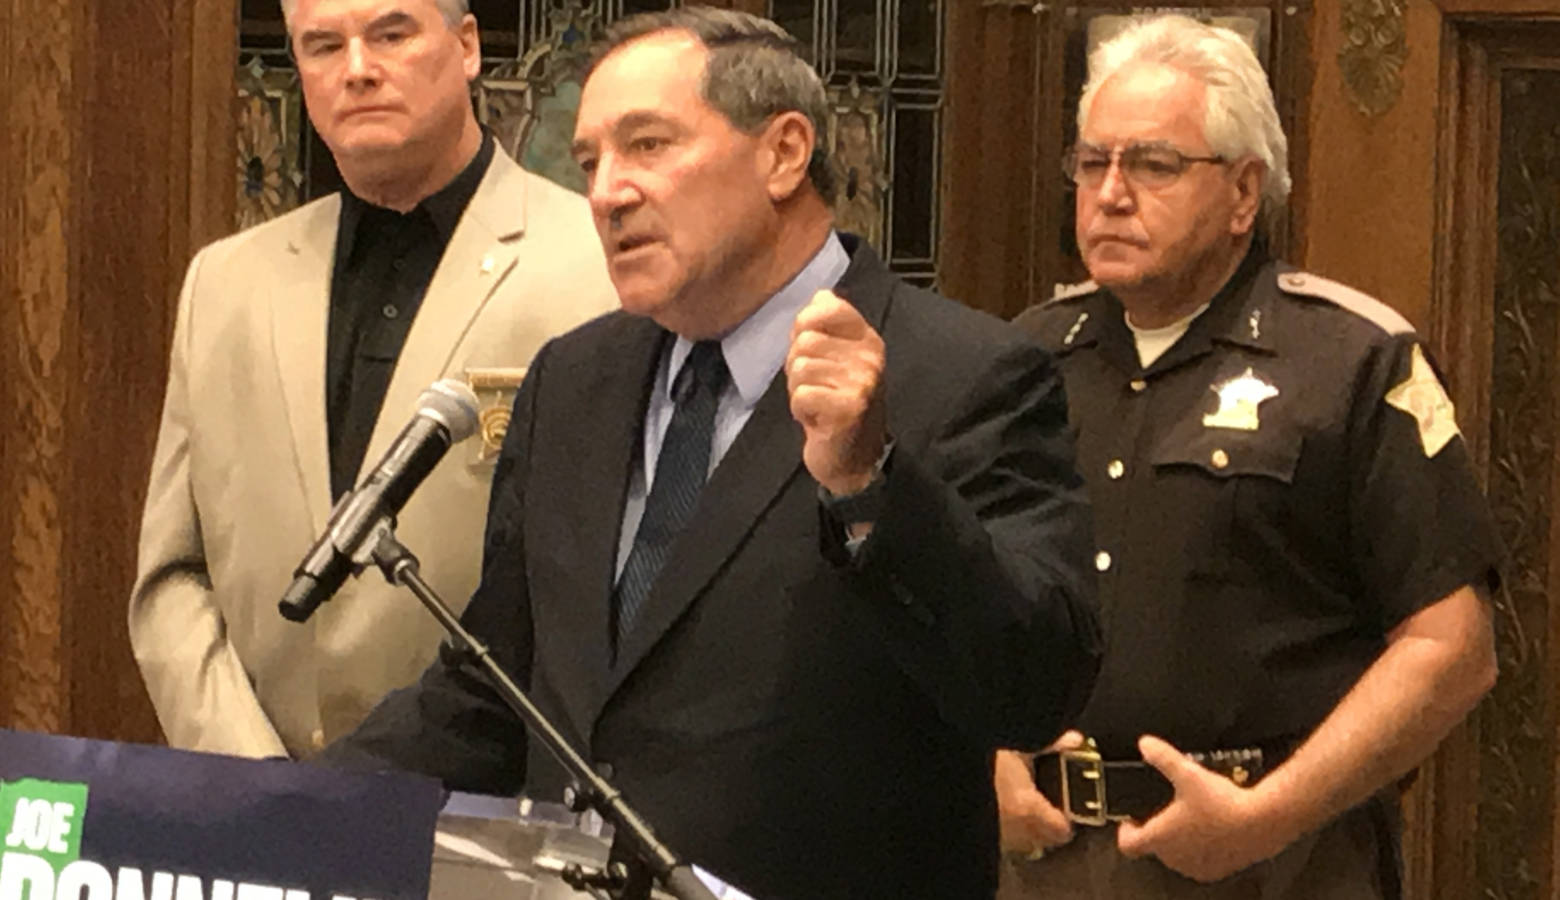 Sen. Joe Donnelly says it’s important to balance enforcement and treatment in the fight against drug addiction. (Brandon Smith/IPB News)